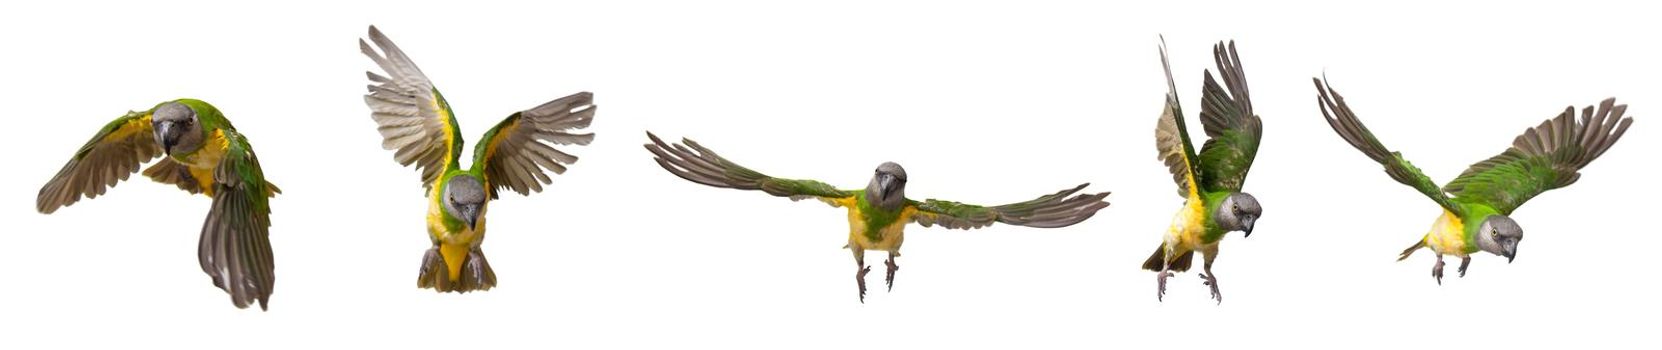 Poicephalus senegalus. Senegal parrot in flight in front of a white background. photo